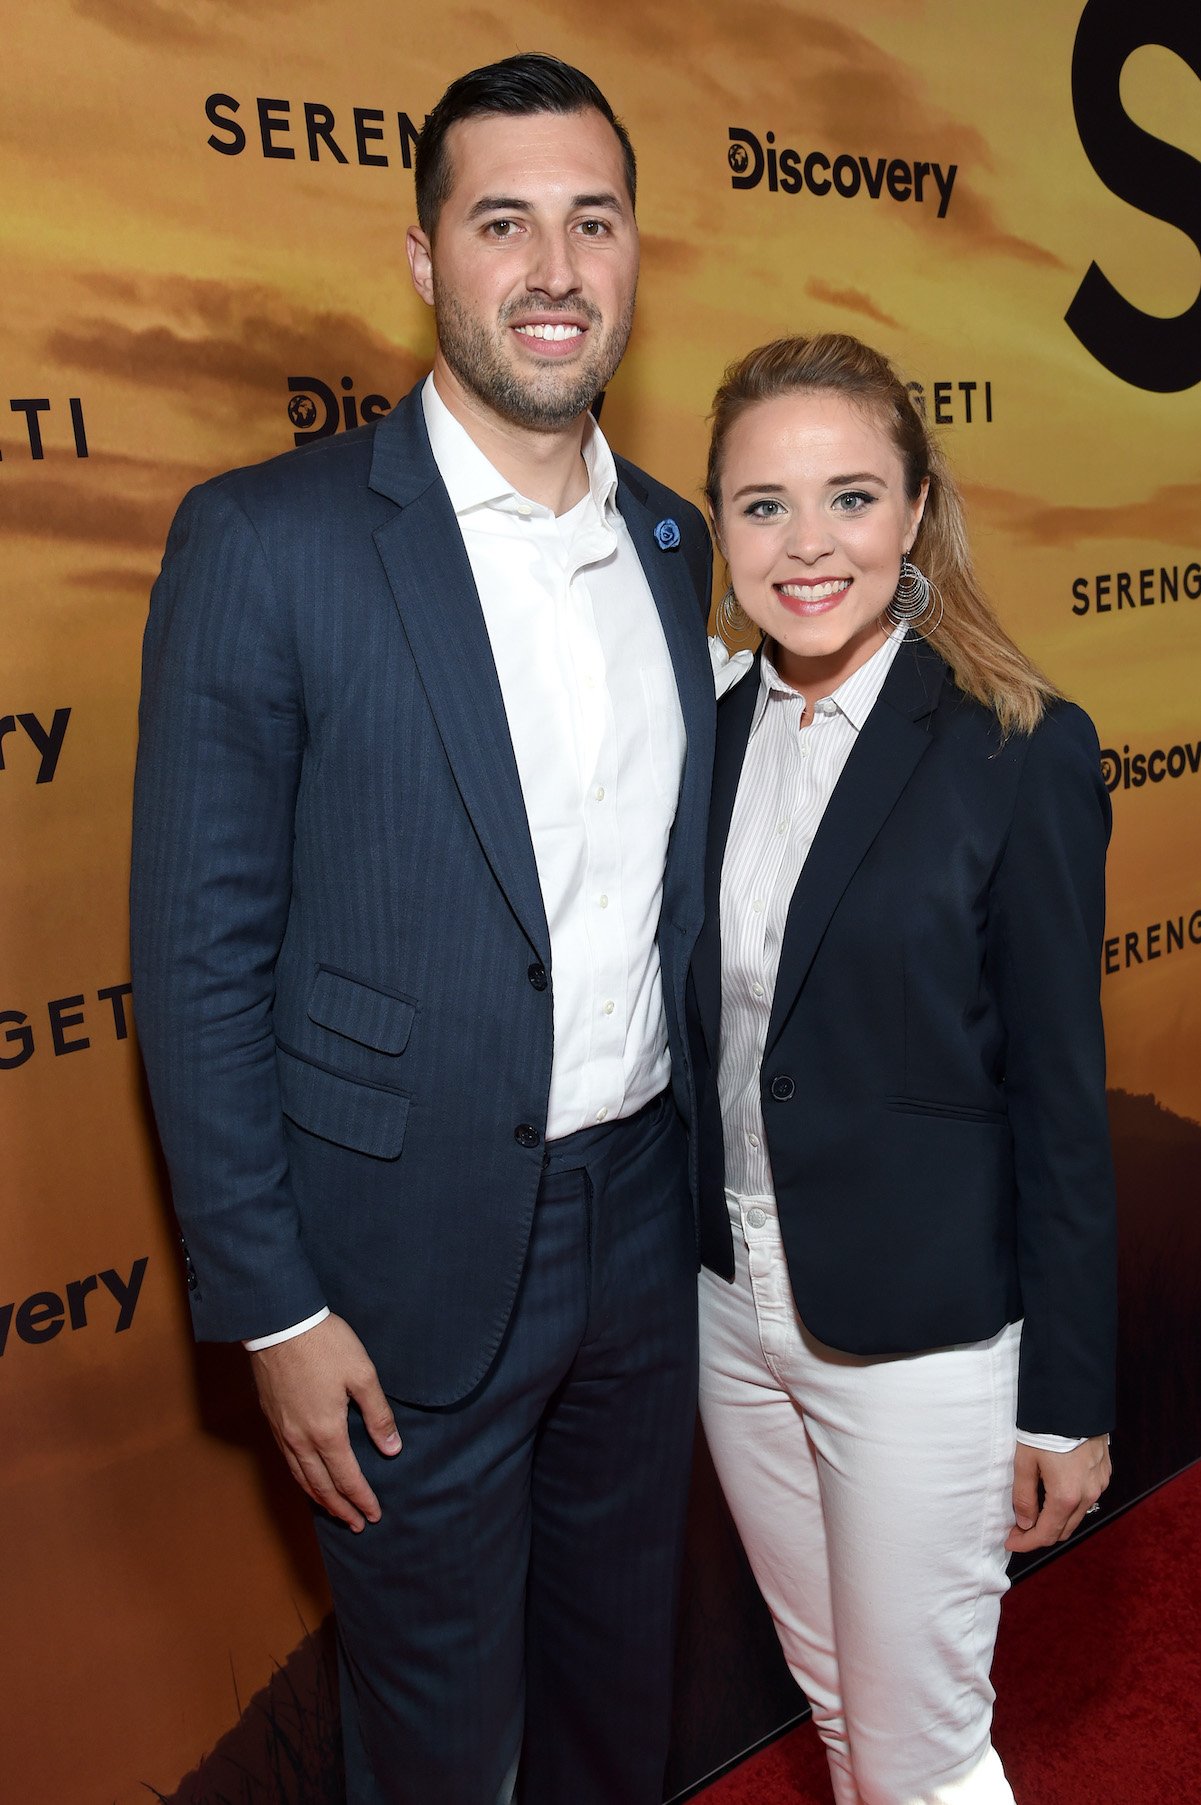 'Counting On' stars Jinger Duggar and Jeremy Vuolo in 2019